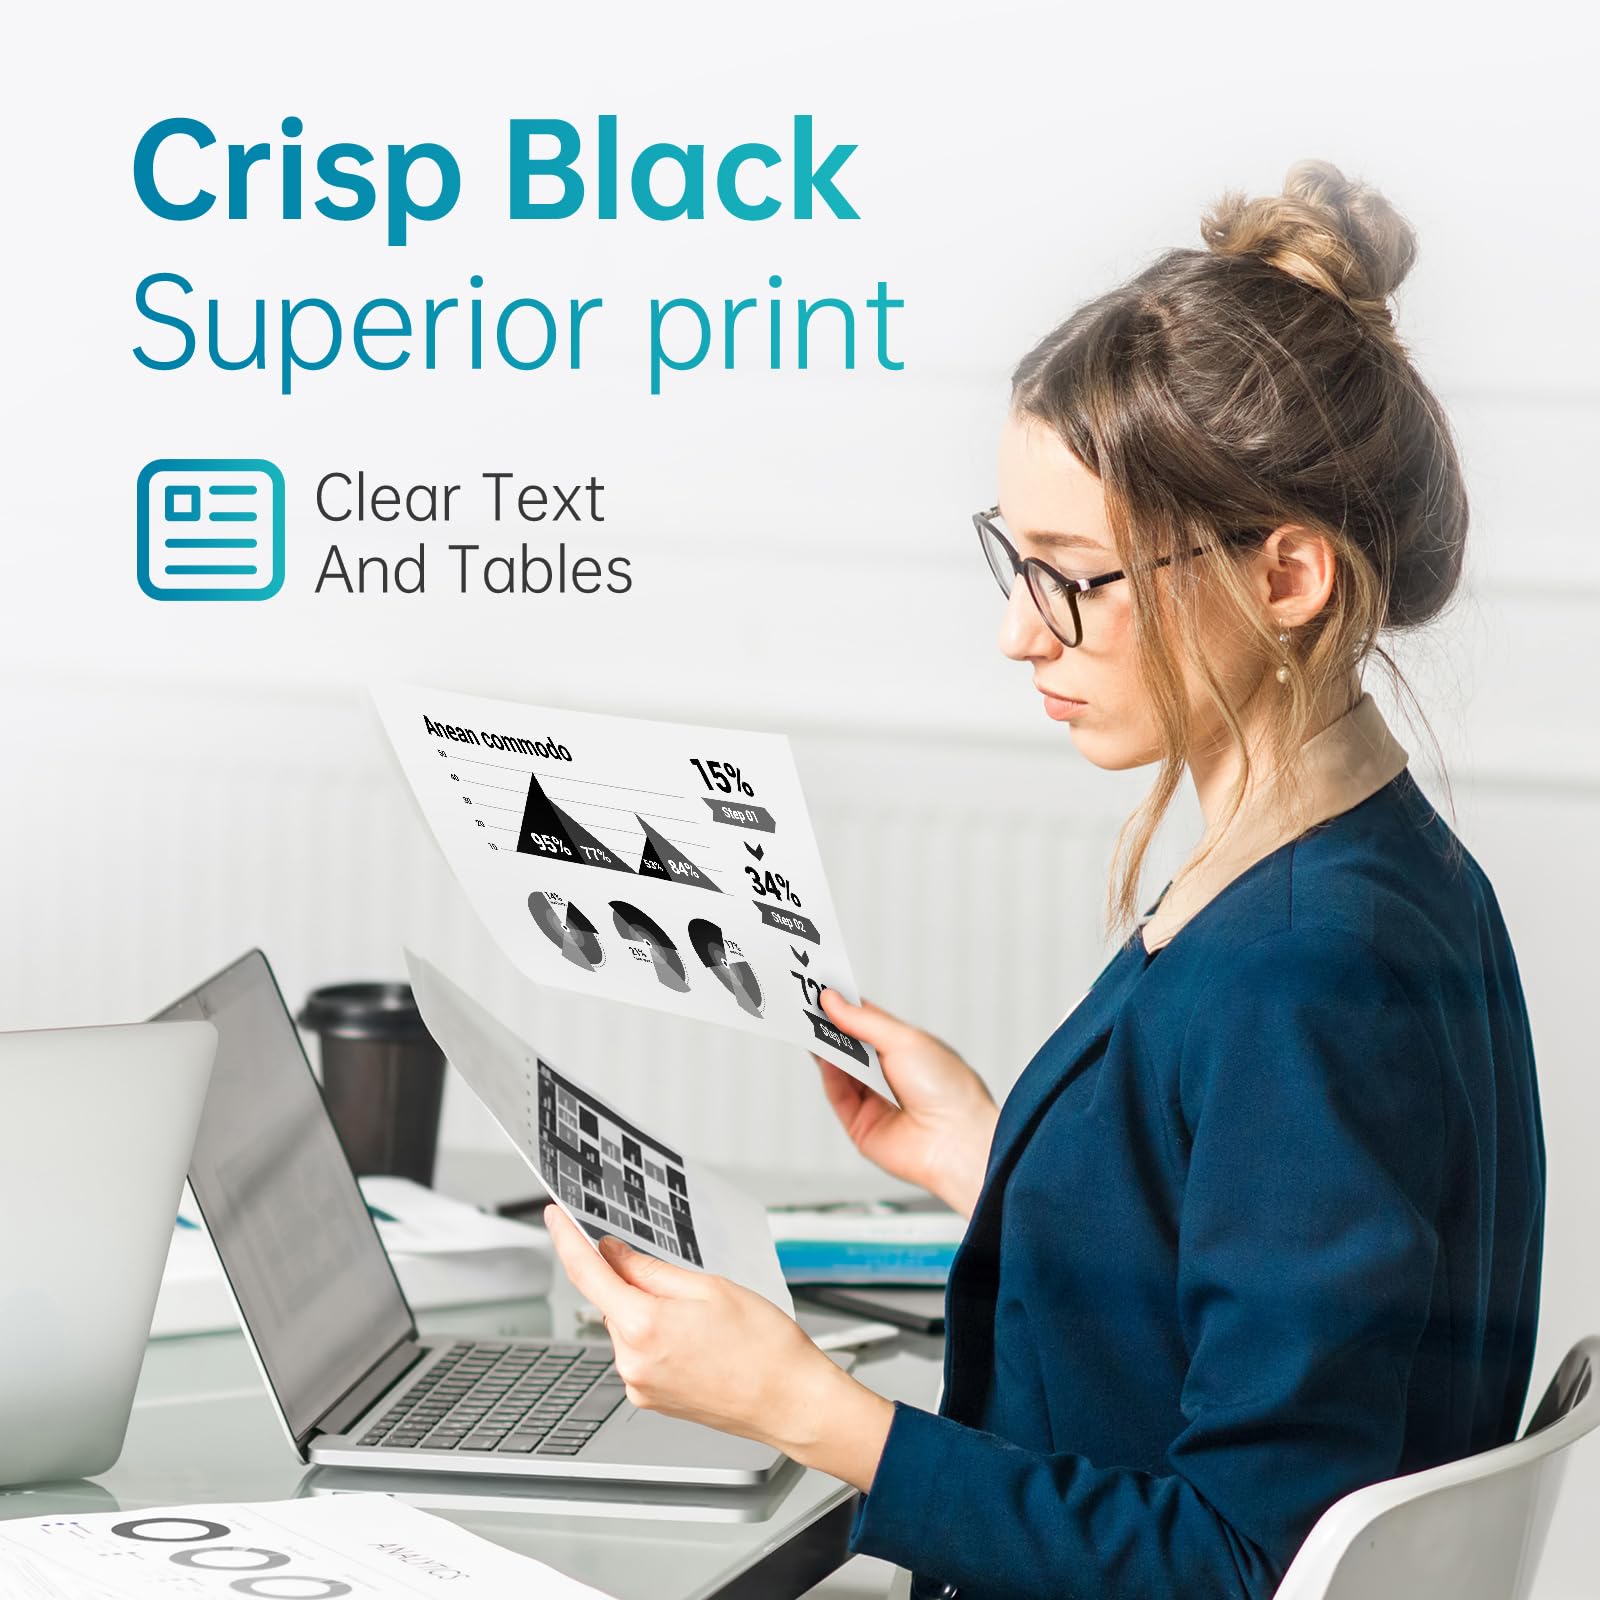 Woman reviewing documents with crisp black print and clear text